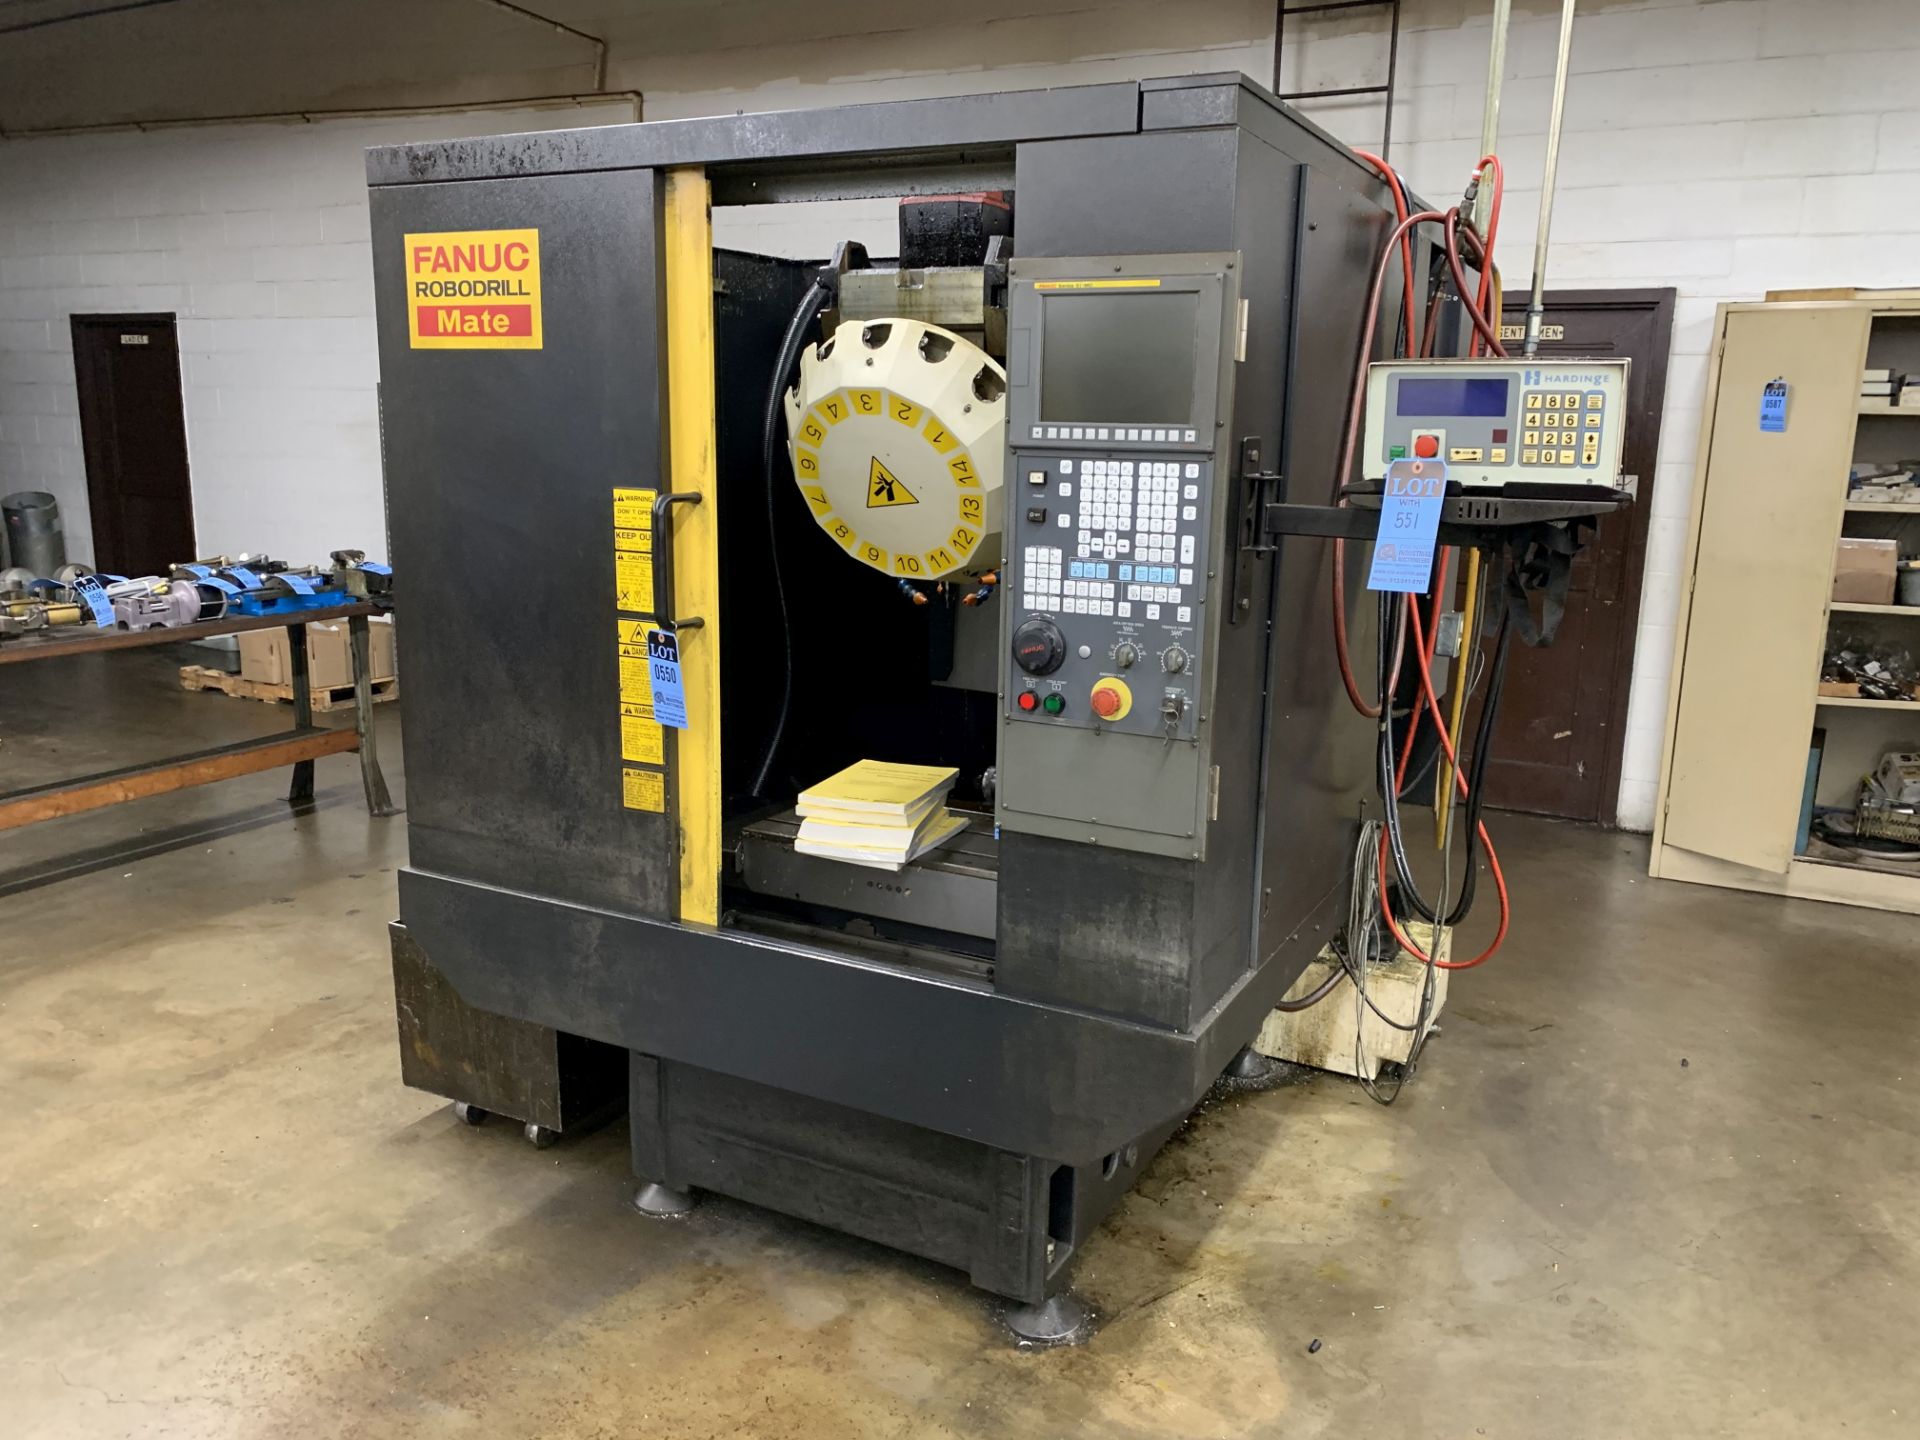 FANUC MODEL ROBODRILL MATE CNC DRILL AND TAPPING CENTER; S/N 071VN201, FANUC Oi-MC CONTROL, 25.6"